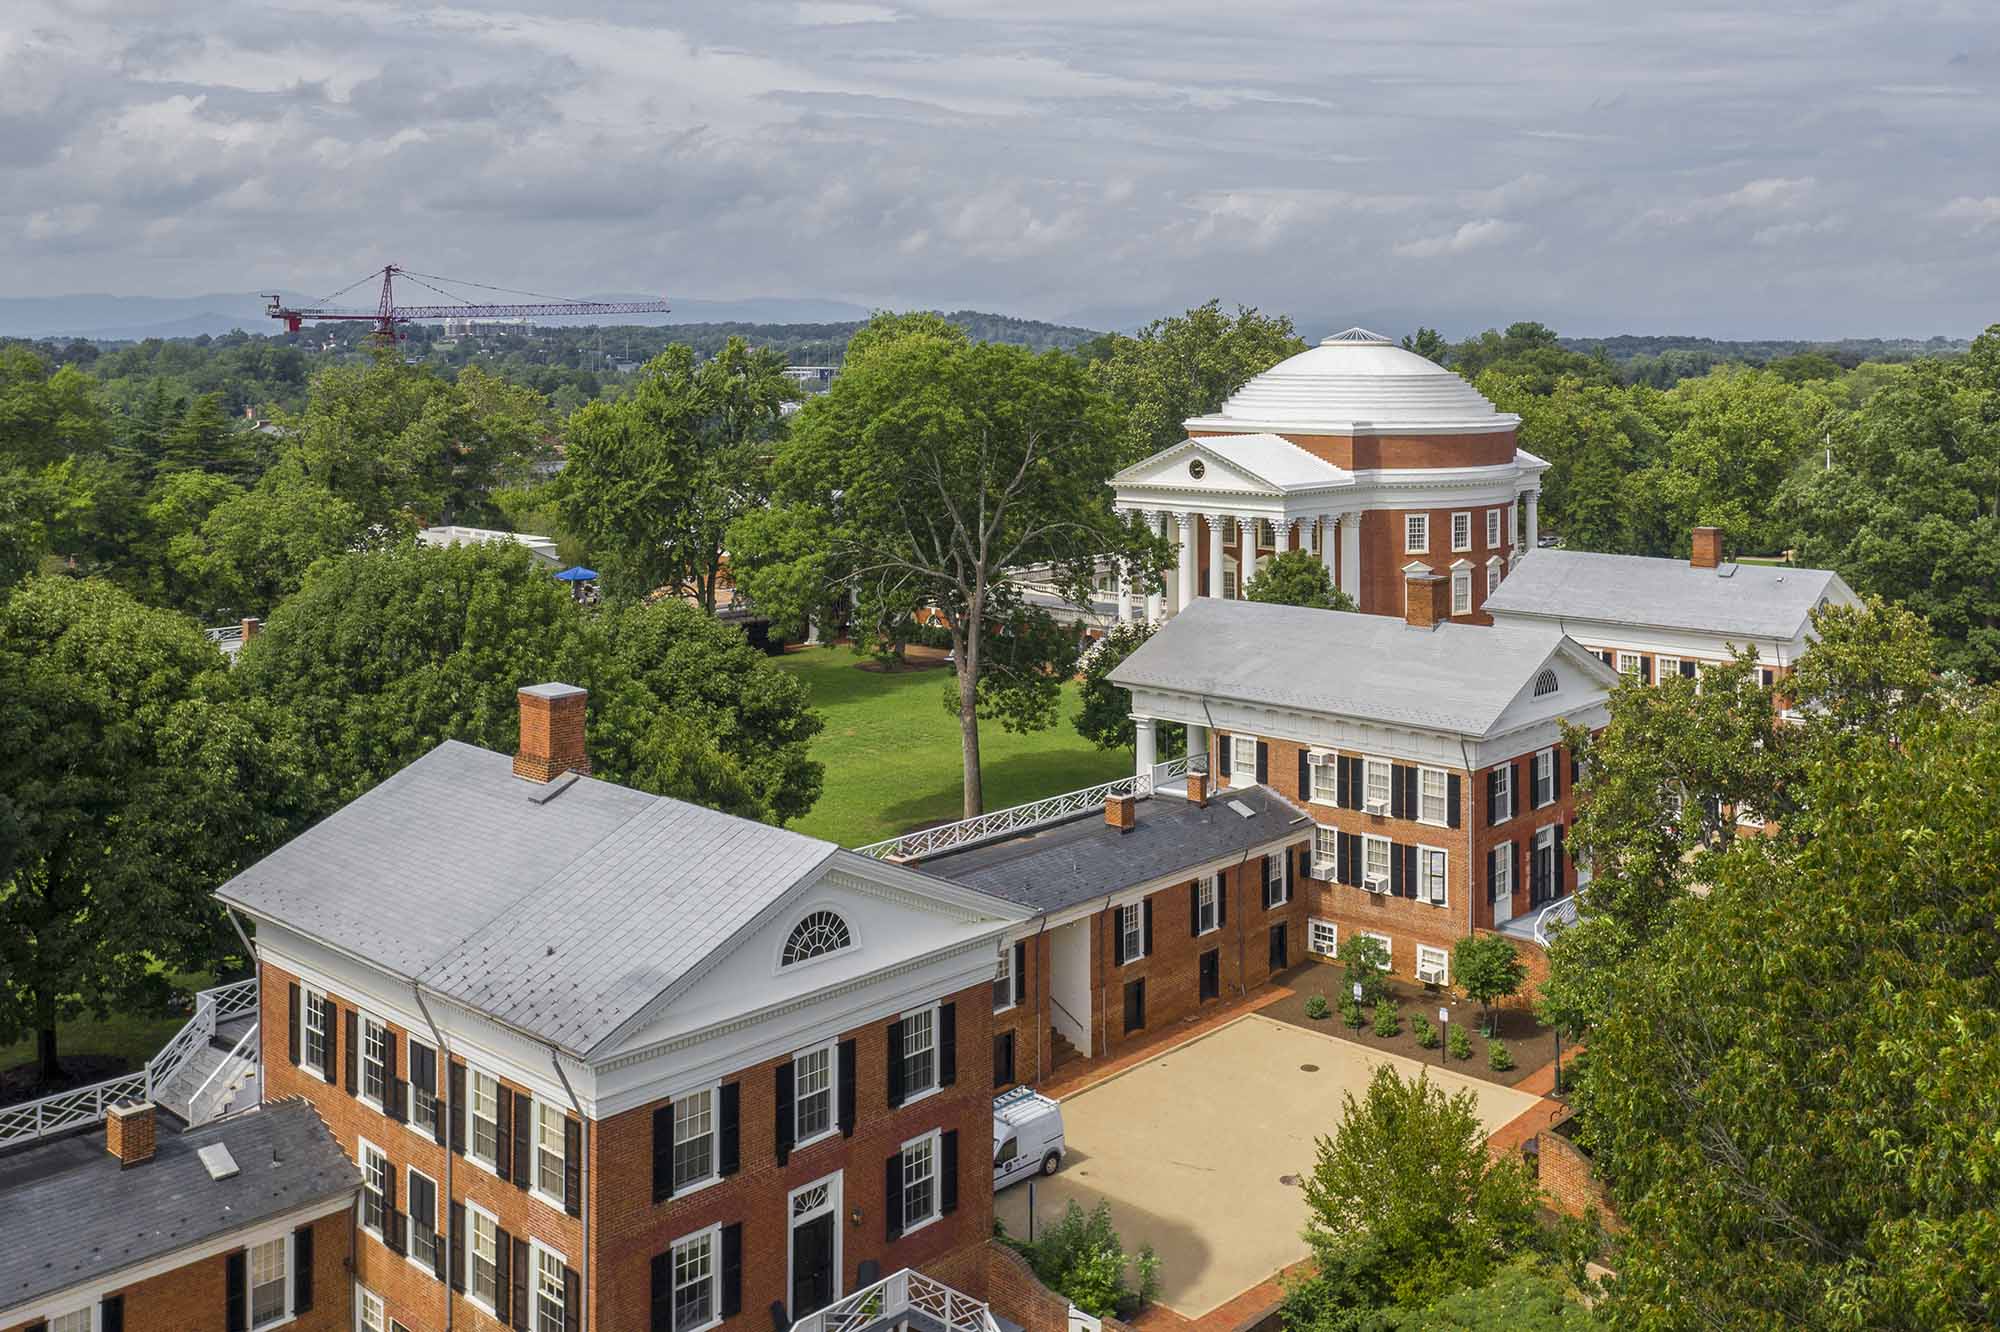 Arial view of the Rotunda from the Lawn Gardens